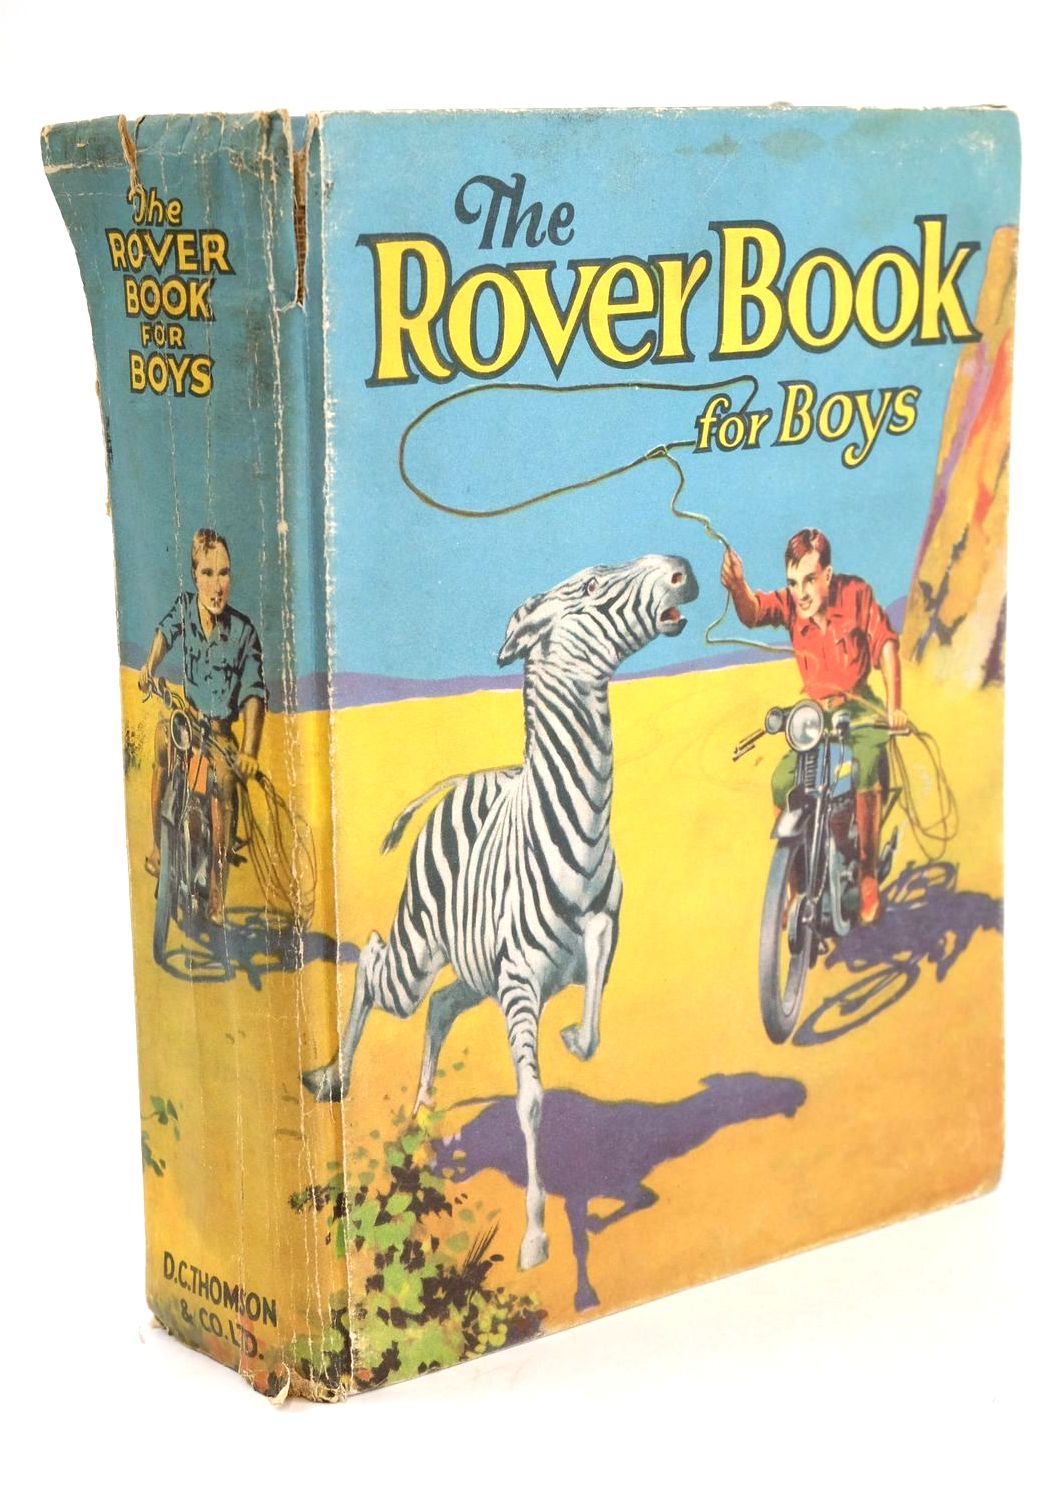 Photo of THE ROVER BOOK FOR BOYS 1933 written by Mackenzie, Falconer White, Richard Radcliffe, Arthur et al, published by D.C. Thomson &amp; Co Ltd. (STOCK CODE: 1324786)  for sale by Stella & Rose's Books